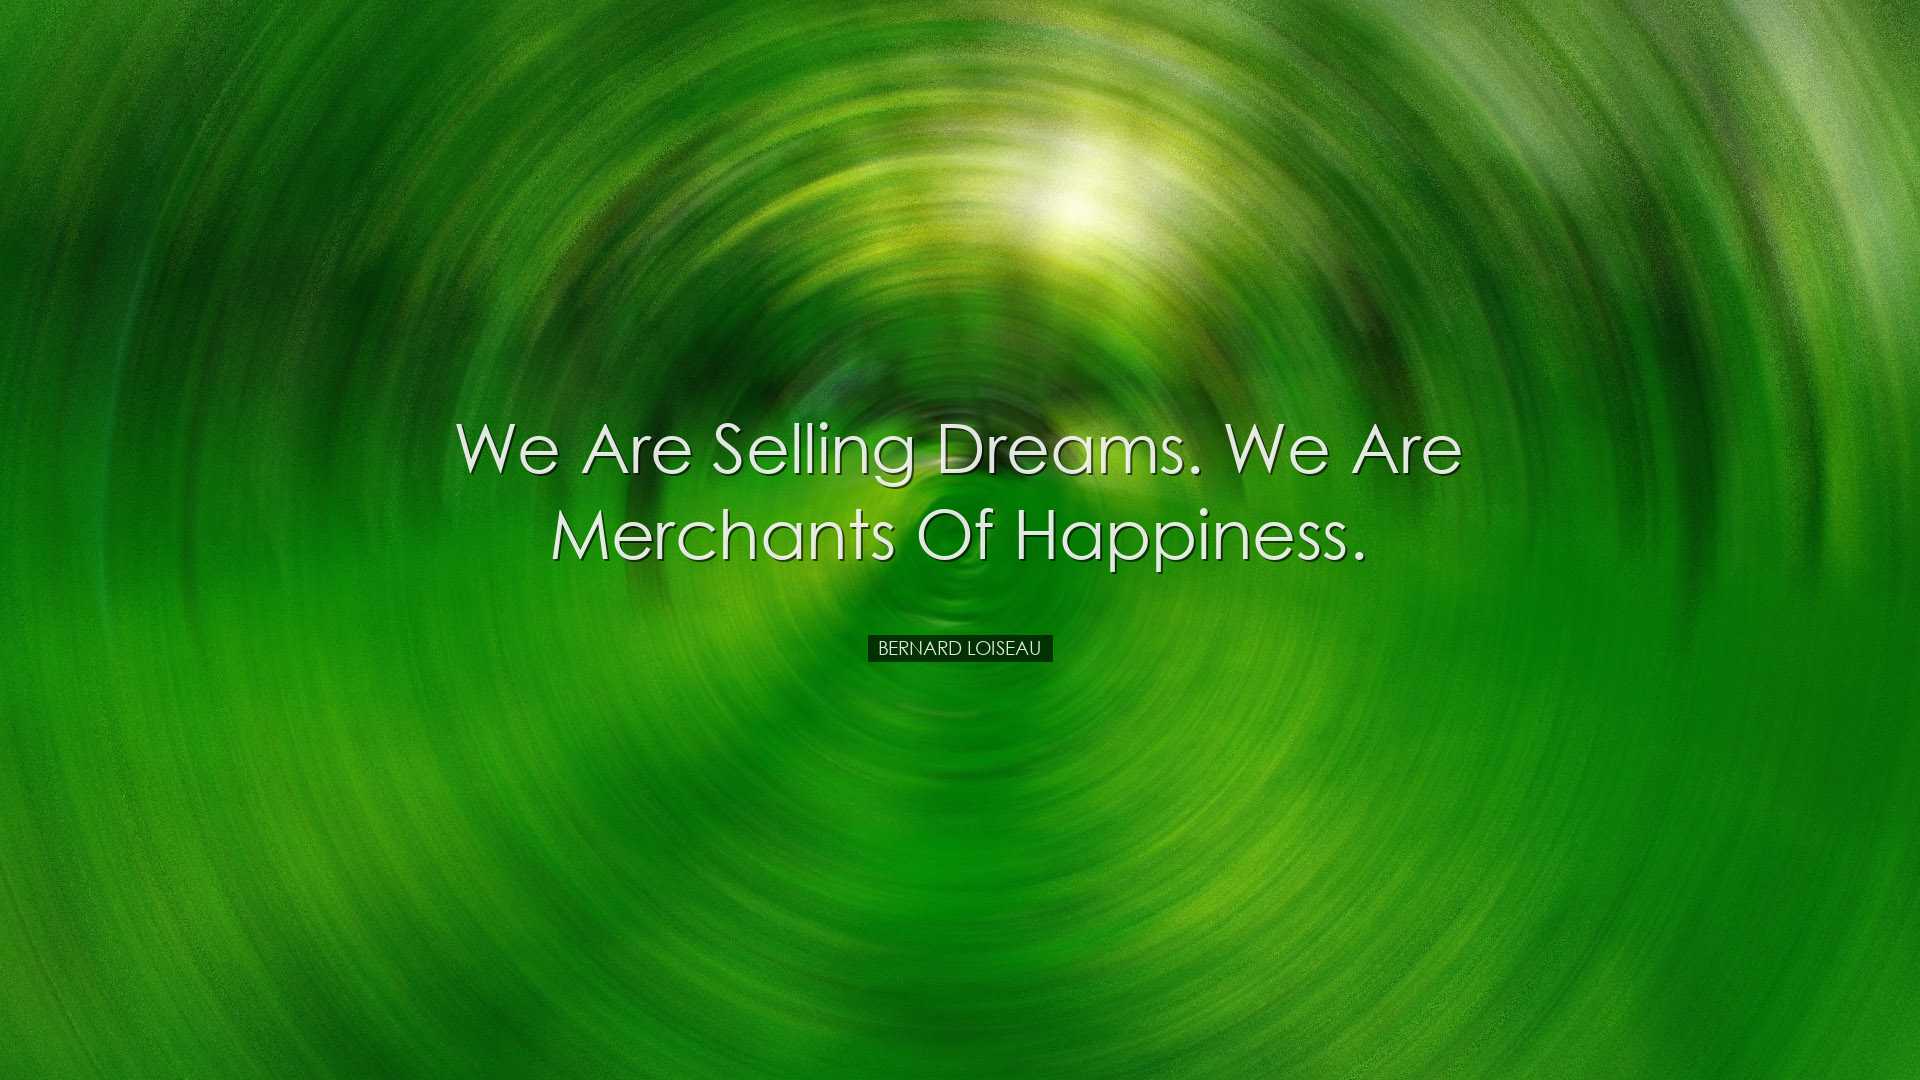 We are selling dreams. We are merchants of happiness. - Bernard Lo